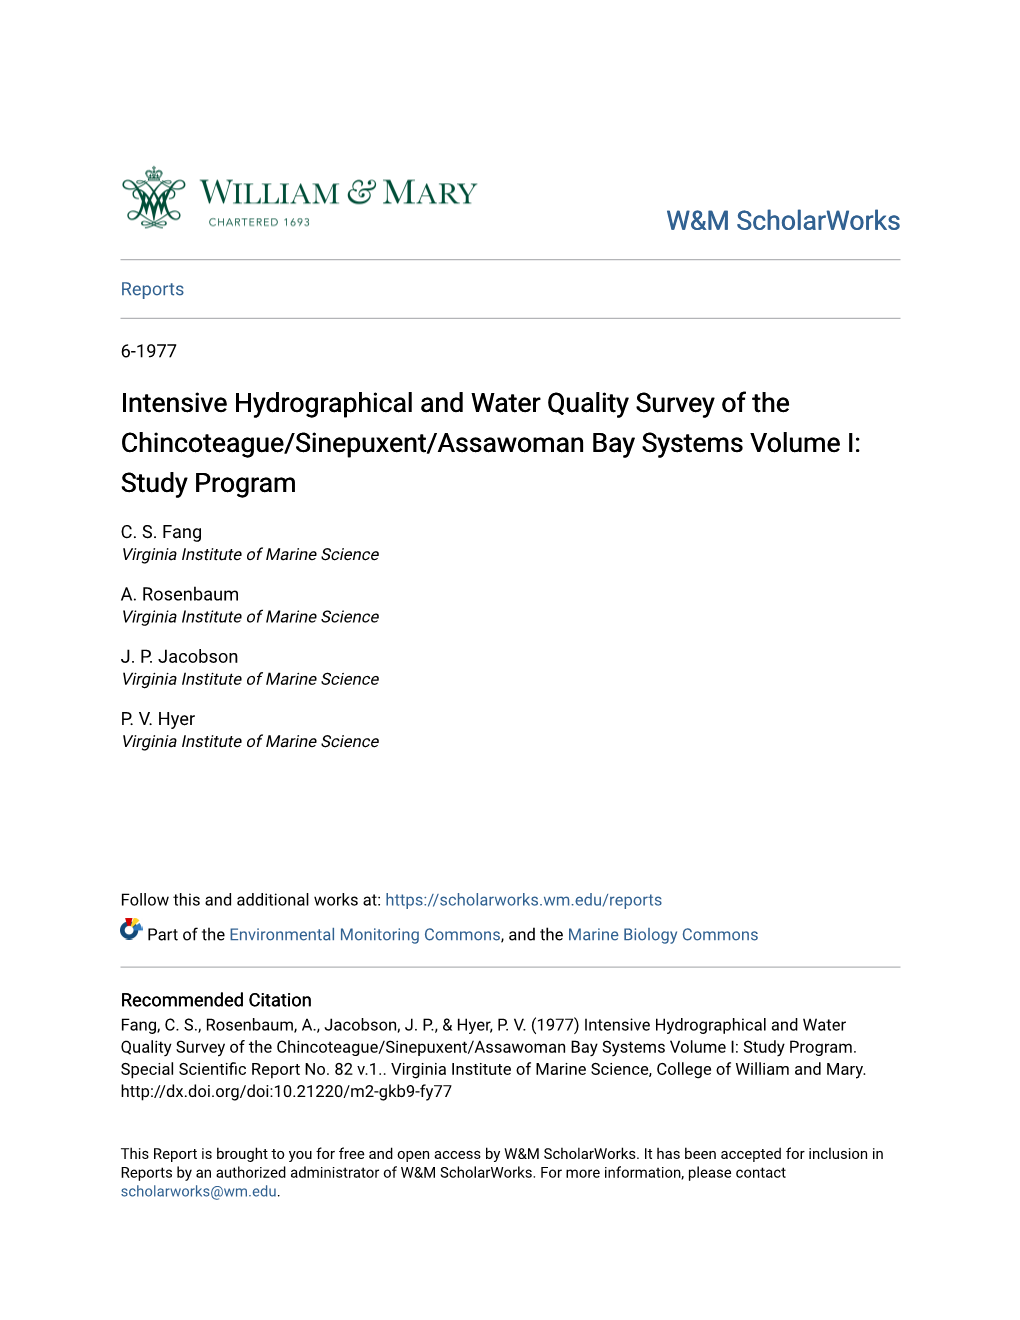 Intensive Hydrographical and Water Quality Survey of the Chincoteague/Sinepuxent/Assawoman Bay Systems Volume I: Study Program